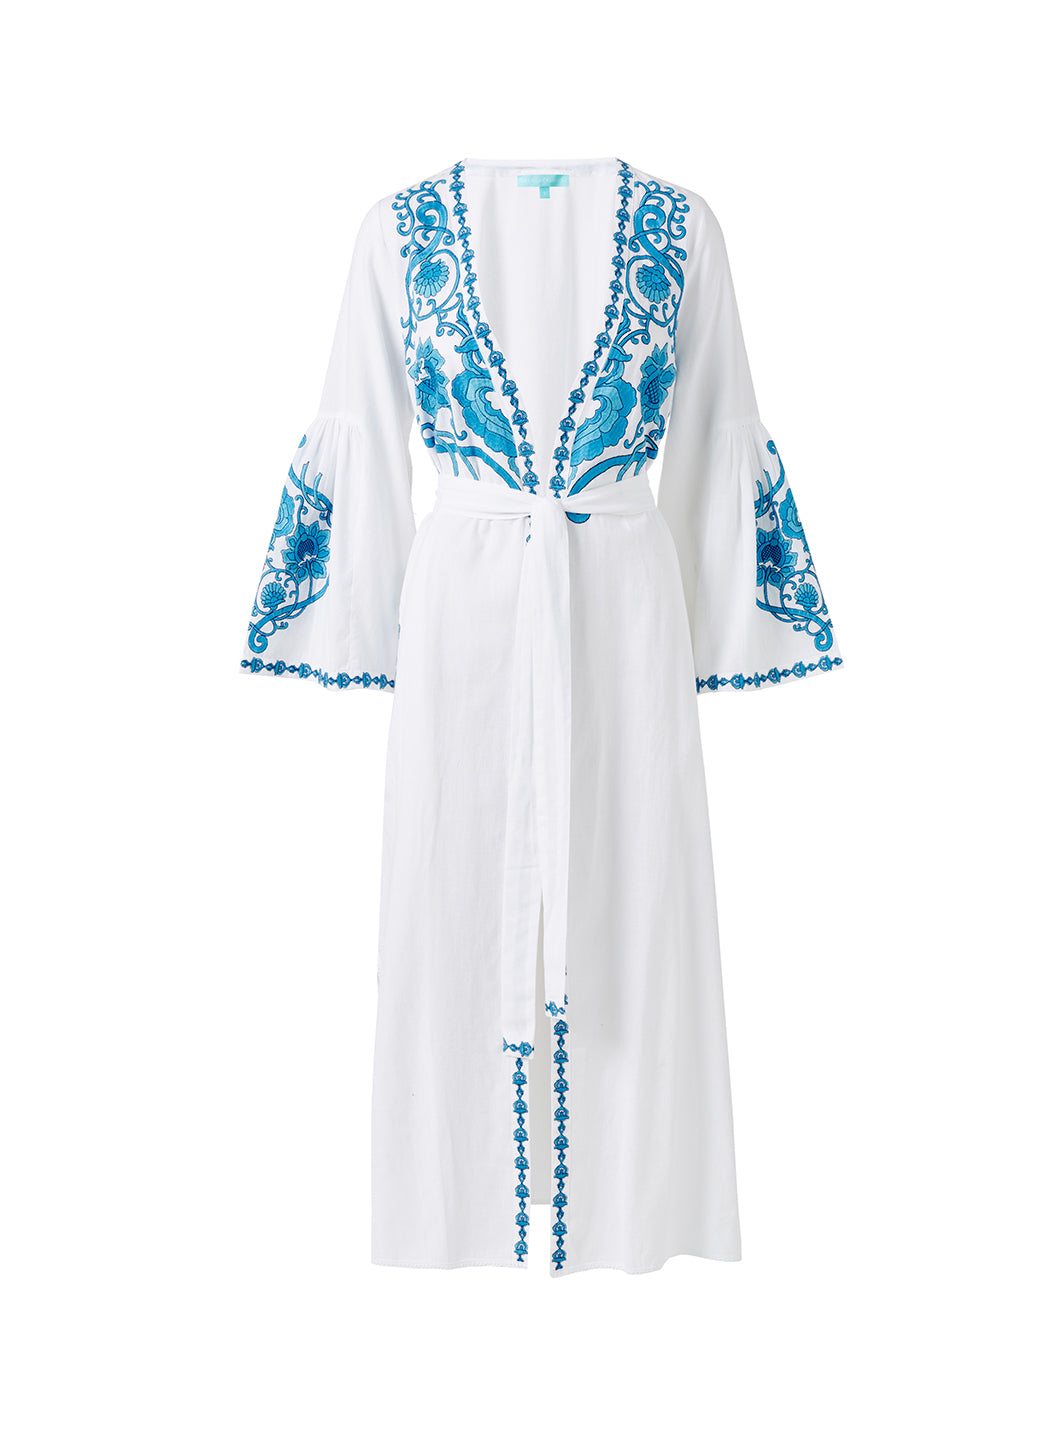 Melissa Odabash Romily White/Blue Embroidered Long Kaftan - 2024 Collection